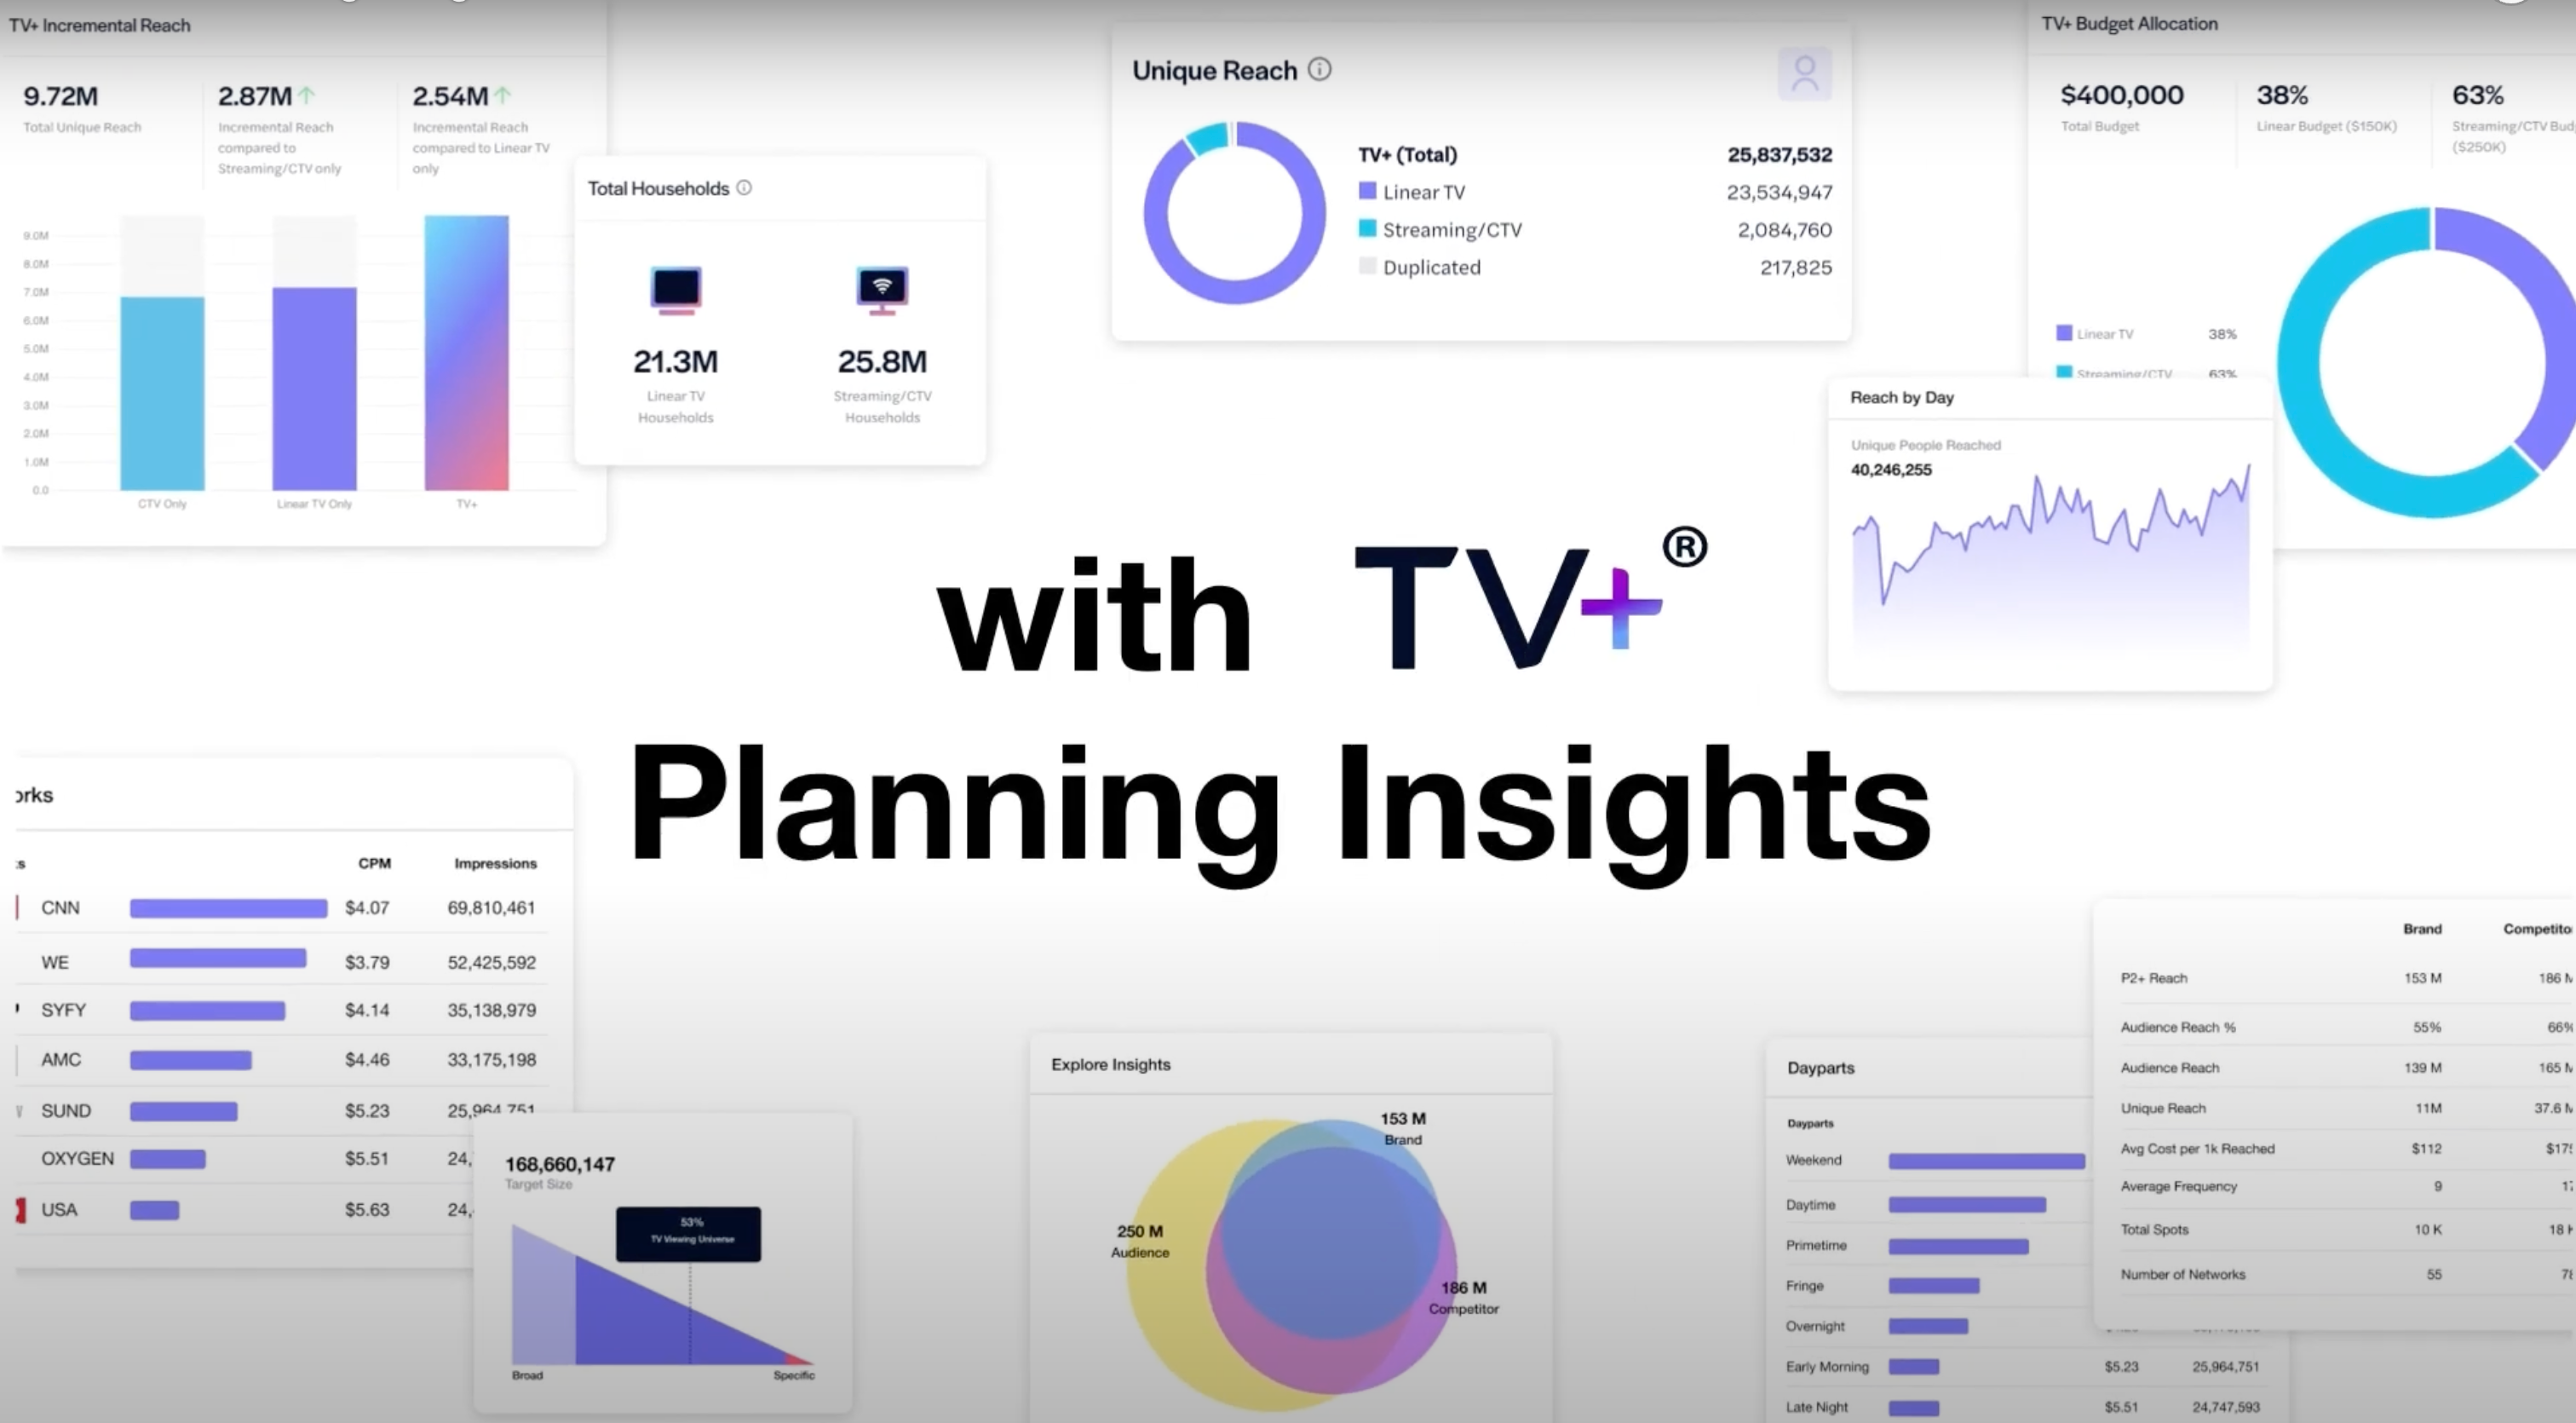 Overview of TV+'s planning and insights tool